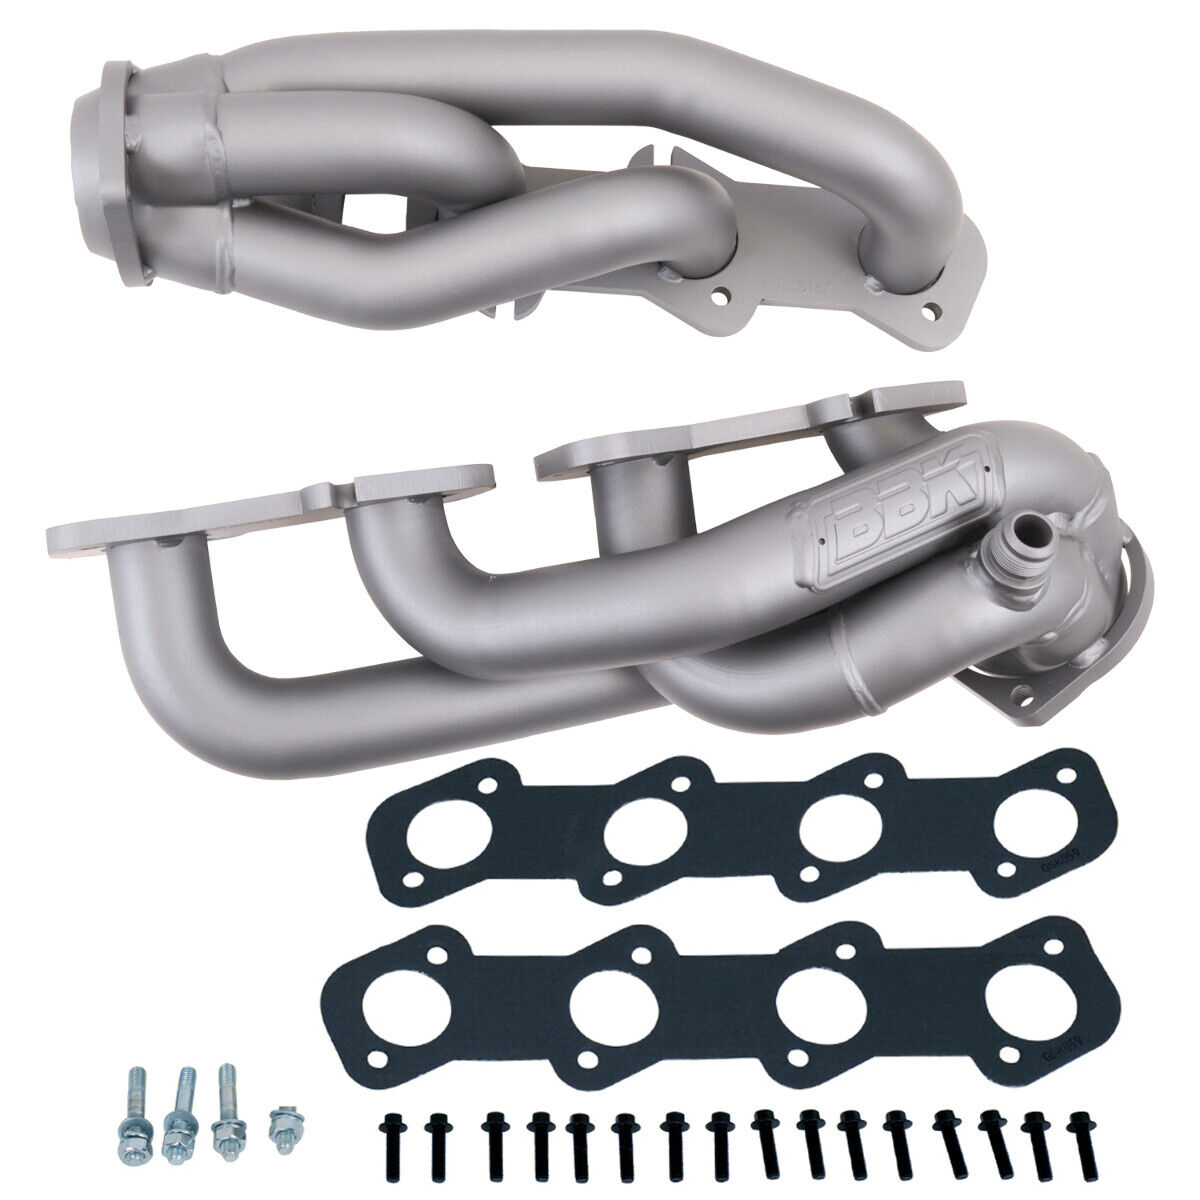 Fits 1997-2003 Ford F150 4.6L & 1997-02 Ford Exp 4.6L 1-5/8 Shorty Headers-3515